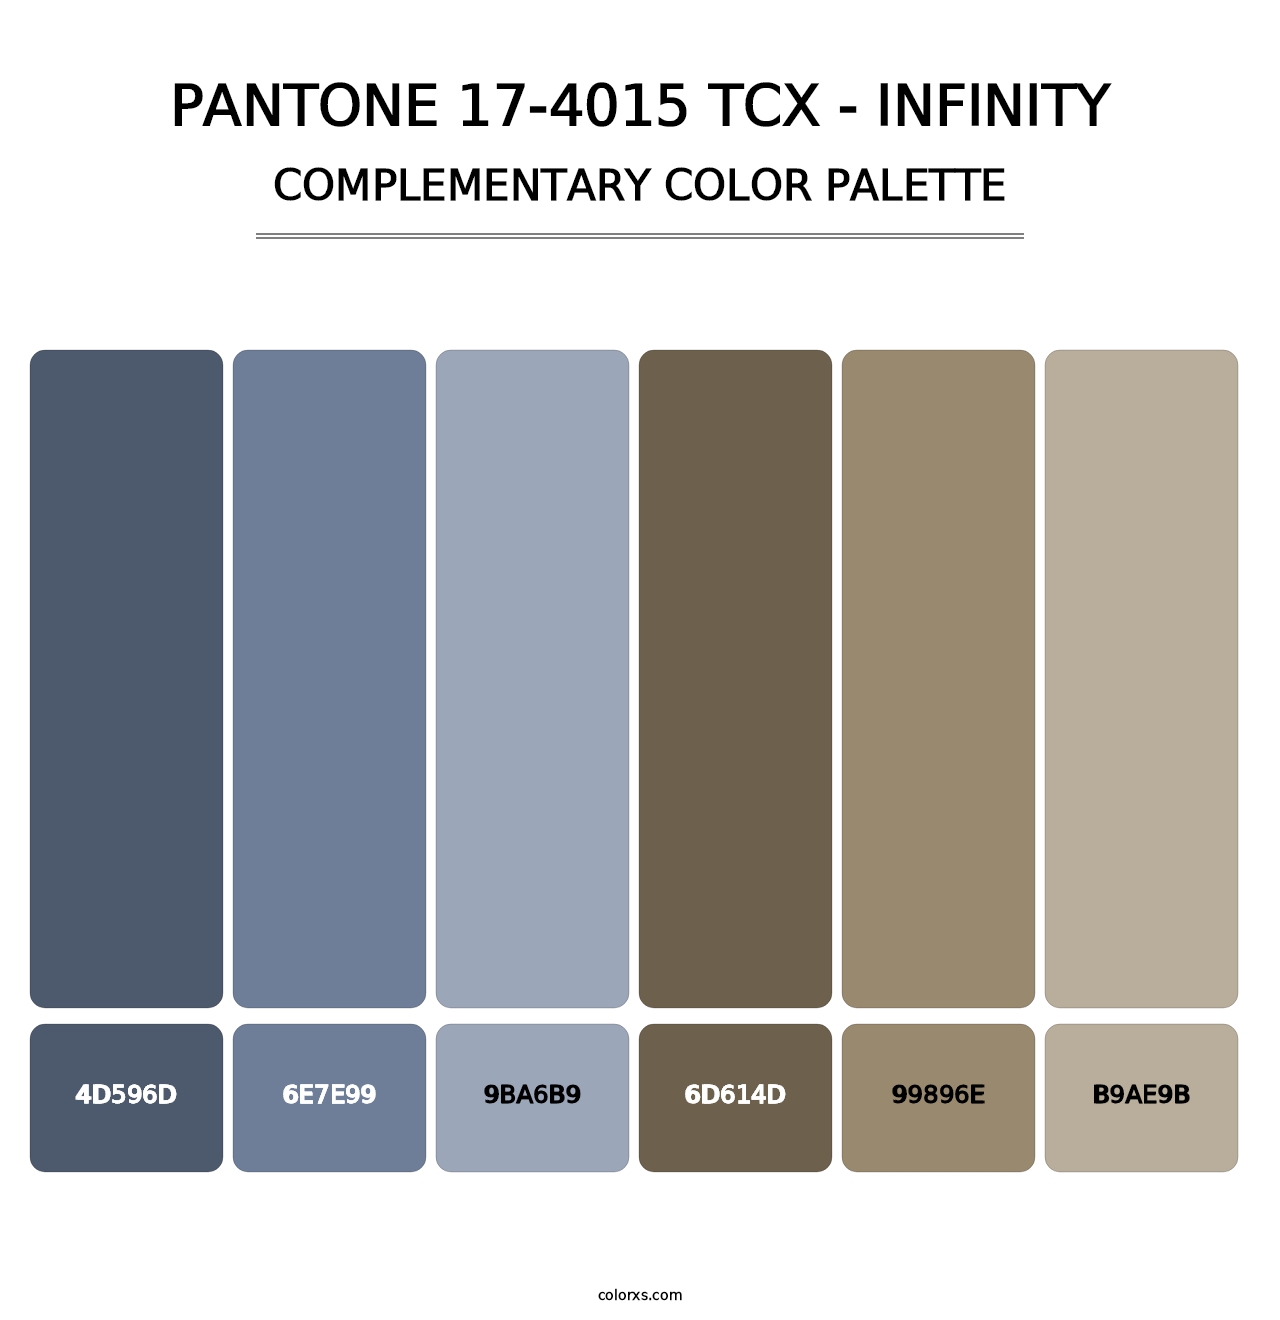 PANTONE 17-4015 TCX - Infinity - Complementary Color Palette